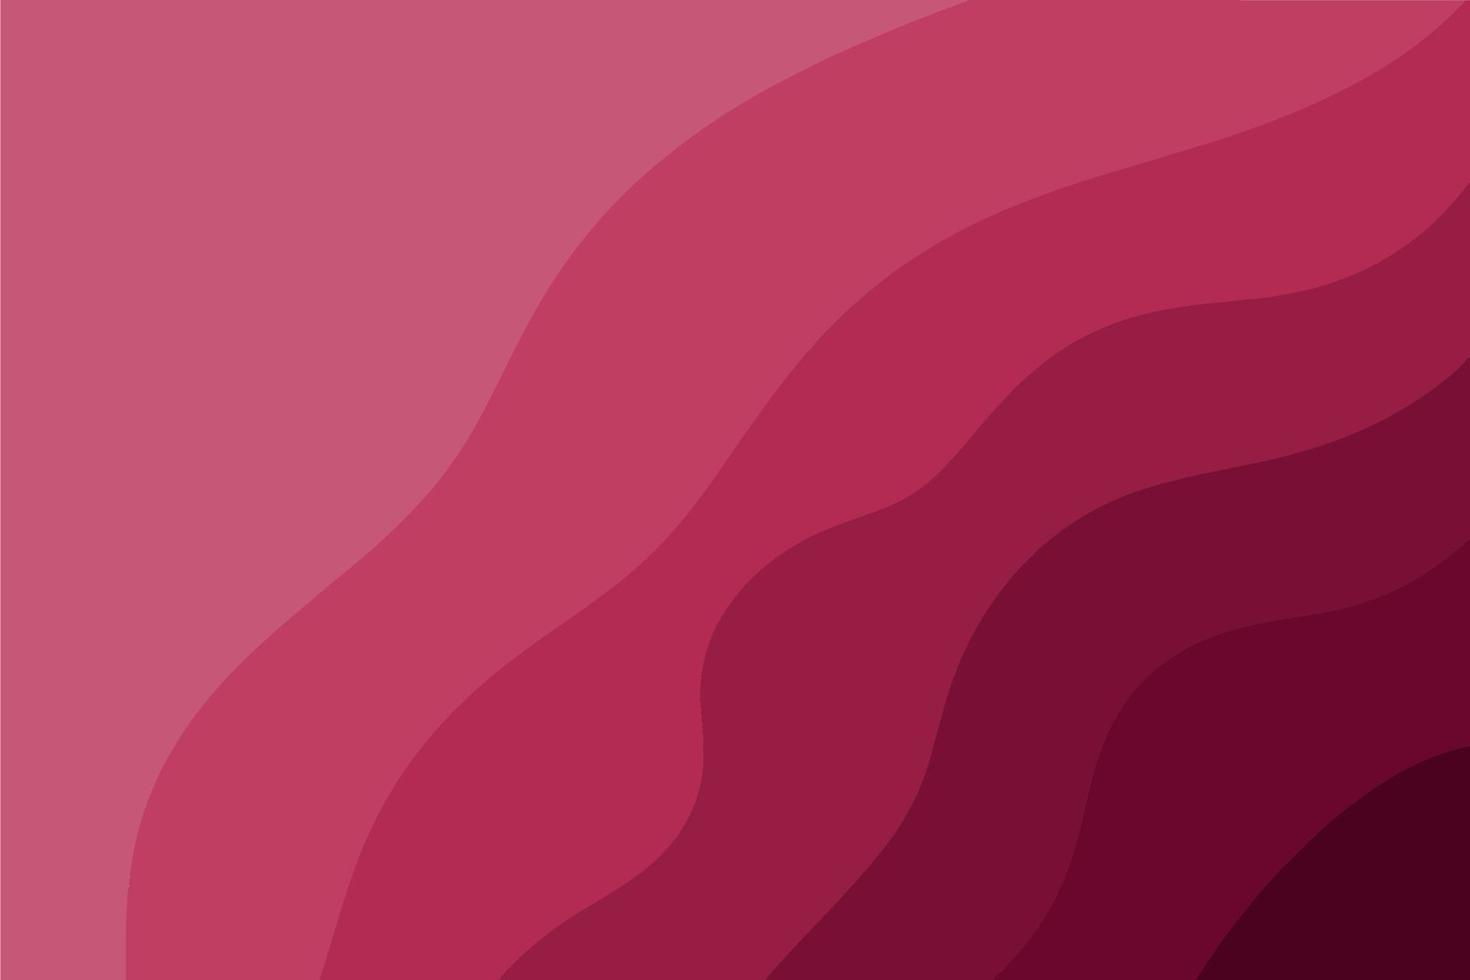 Fashionable abstract background in shades of pink. Vector illustration.